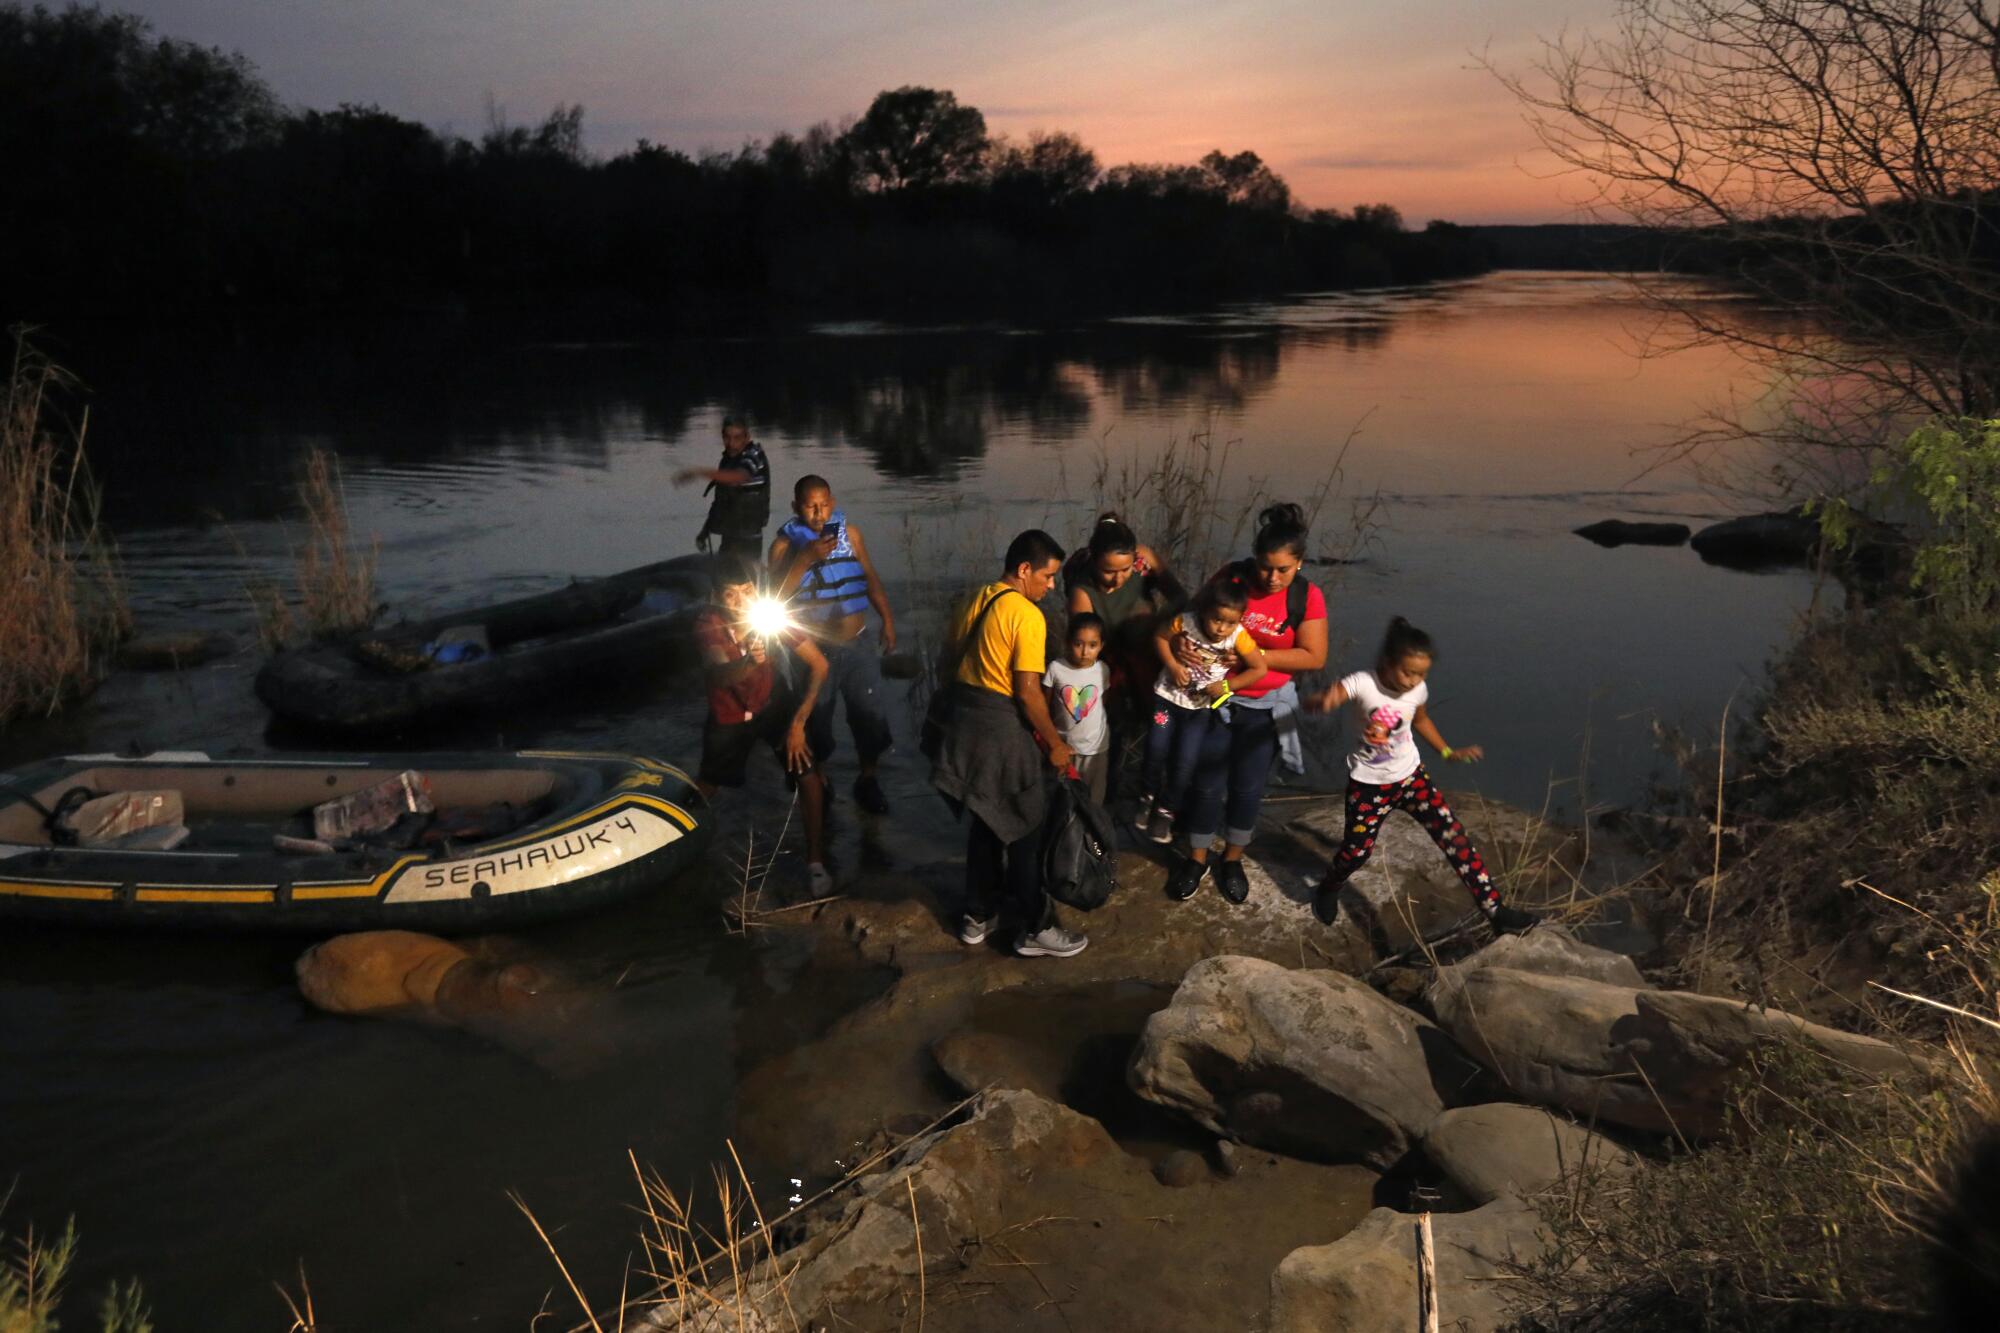 Migrants land on the U.S. side after crossing the Rio Grande in a small boat